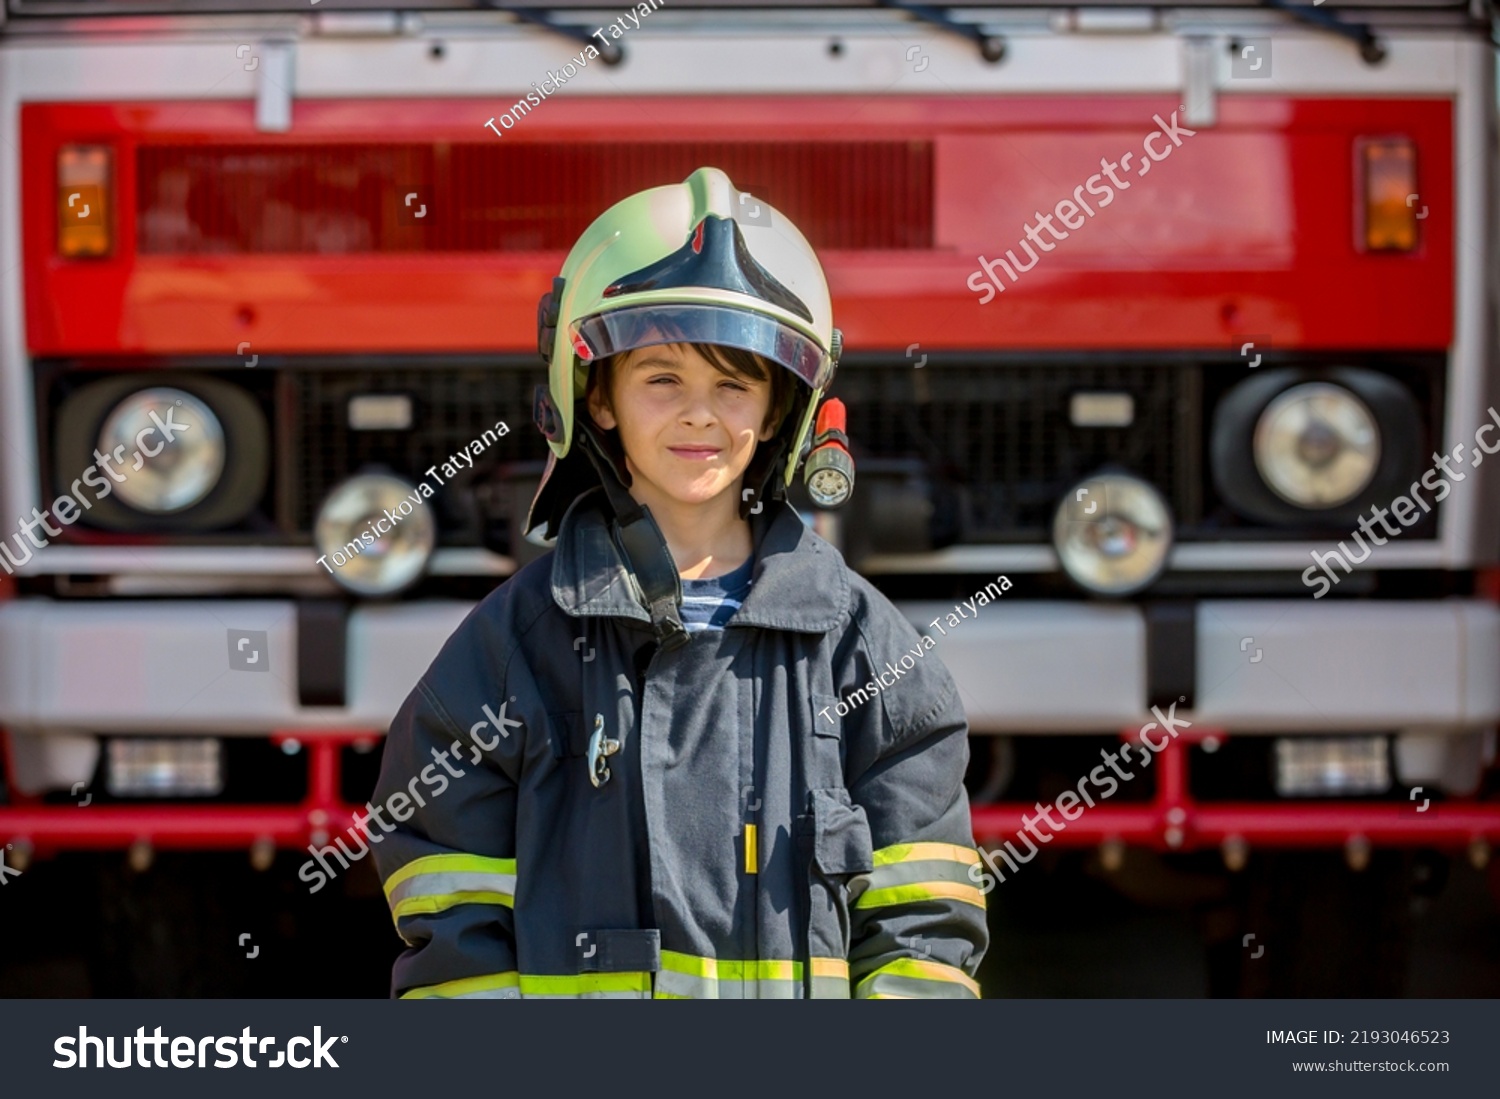 Child, cute boy, dressed in fire fighers cloths in a fire station with fire truck, childs dream #2193046523